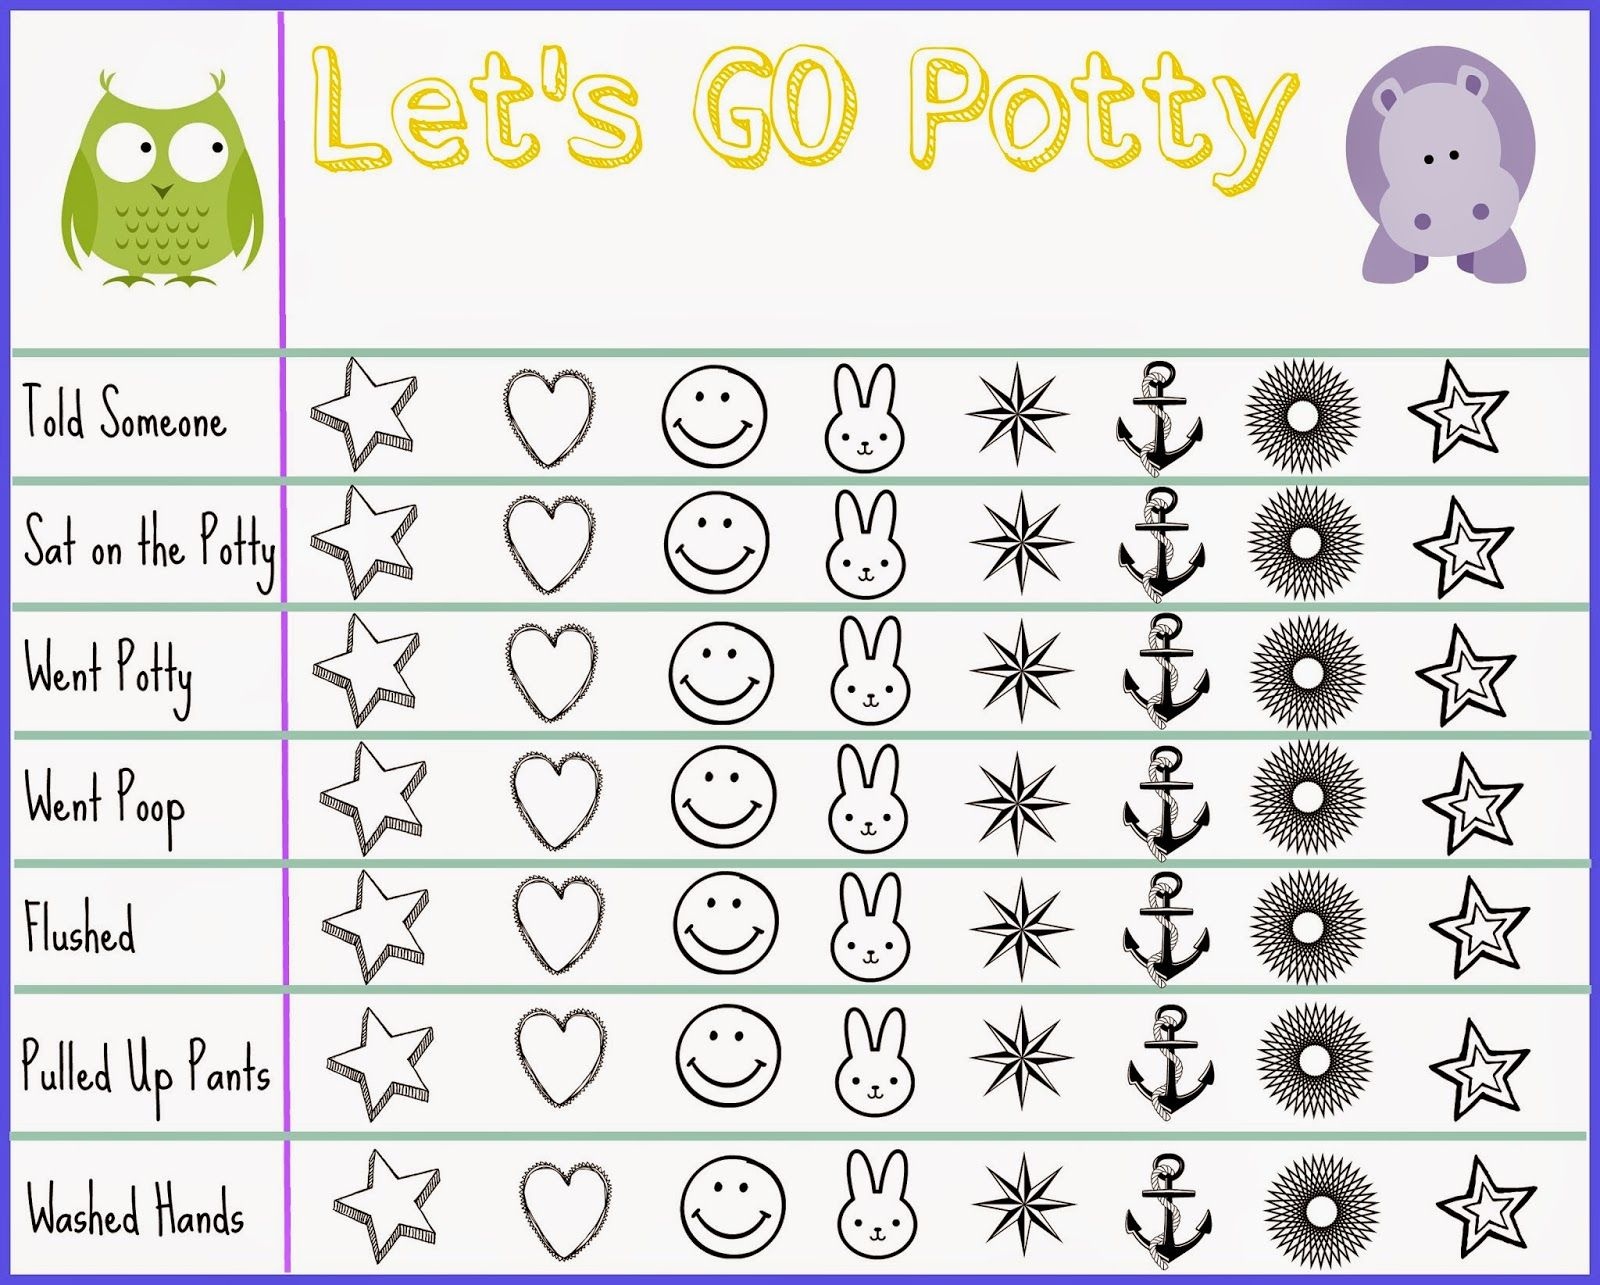 Stress-Free Potty Training - Free Printable Sticker Chart - Free Printable Potty Training Books For Toddlers